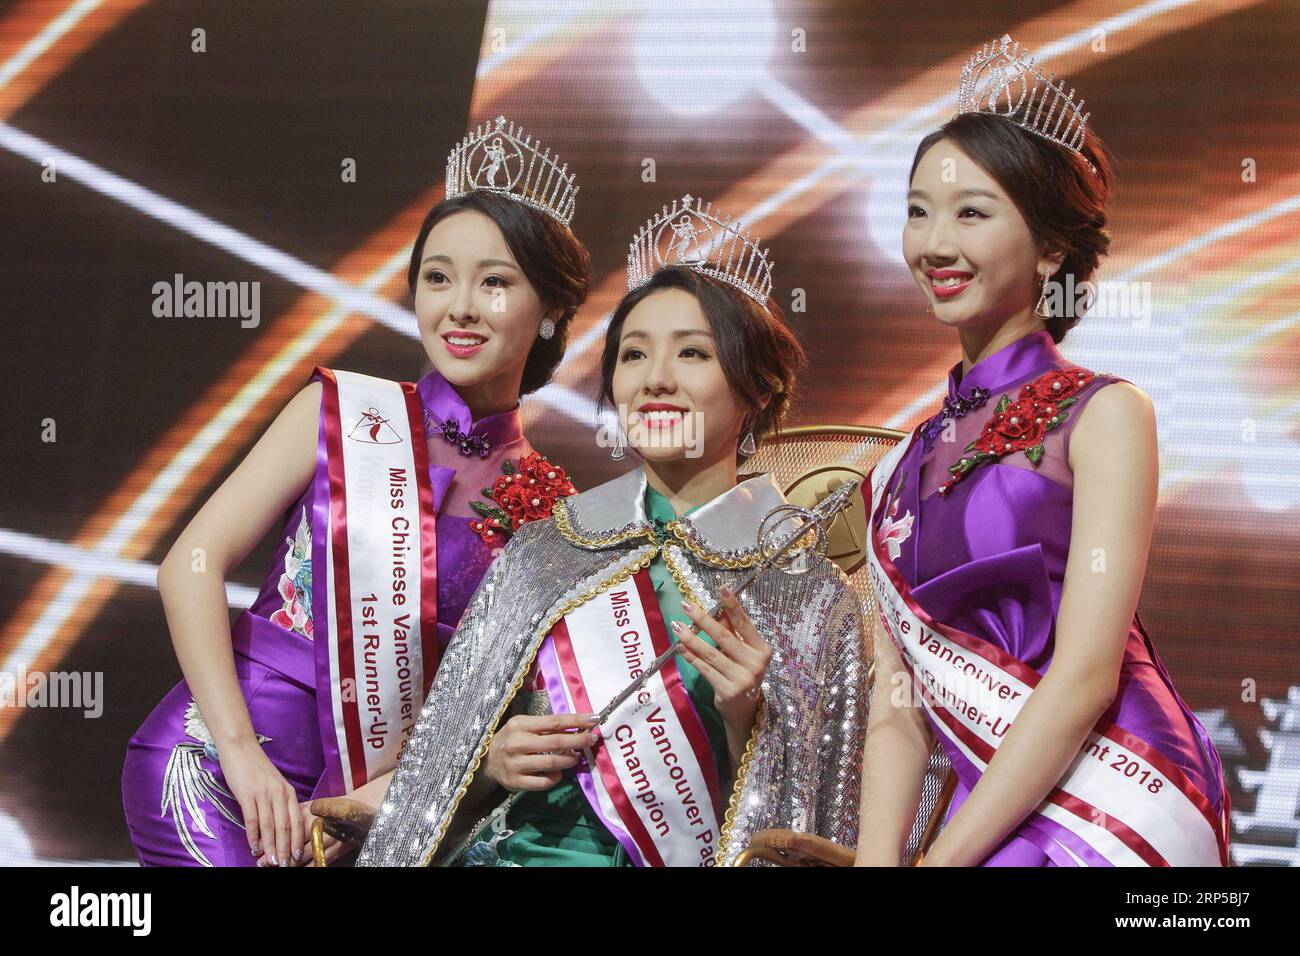 (181207) -- VANCOUVER, Dec. 7, 2018 -- Miss Chinese Vancouver Pageant 2018 Champion Alice Lin (C), first runner-up May Li (L) and second runner-up Rachel He pose for photos during the Miss Chinese Vancouver Pageant 2018 at Vancouver Convention Centre in Vancouver, Canada, Dec. 6, 2018. )(wsw) CANADA-VANCOUVER-MISS CHINESE VANCOUVER PAGEANT 2018 LiangxSen PUBLICATIONxNOTxINxCHN Stock Photo